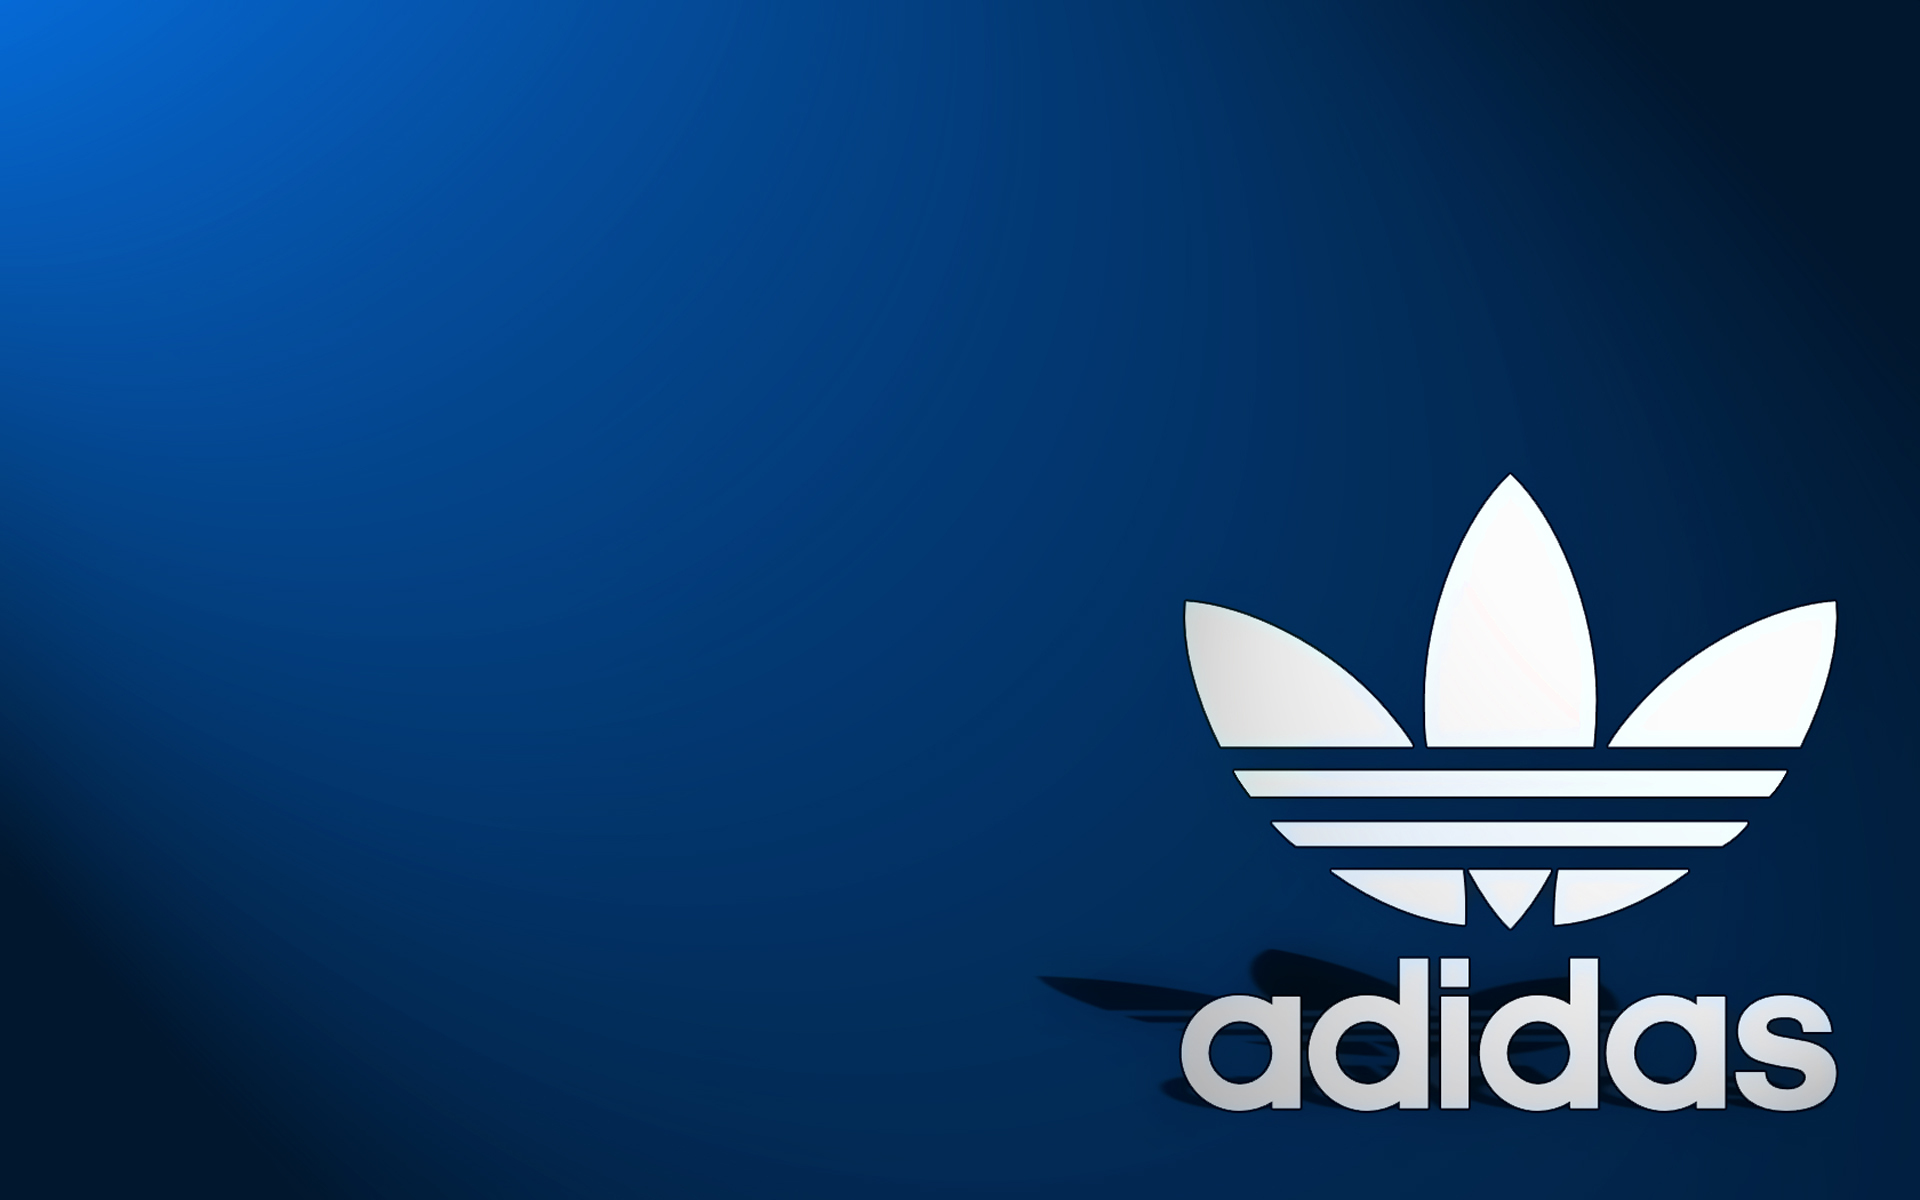 Products Adidas 1920x1200